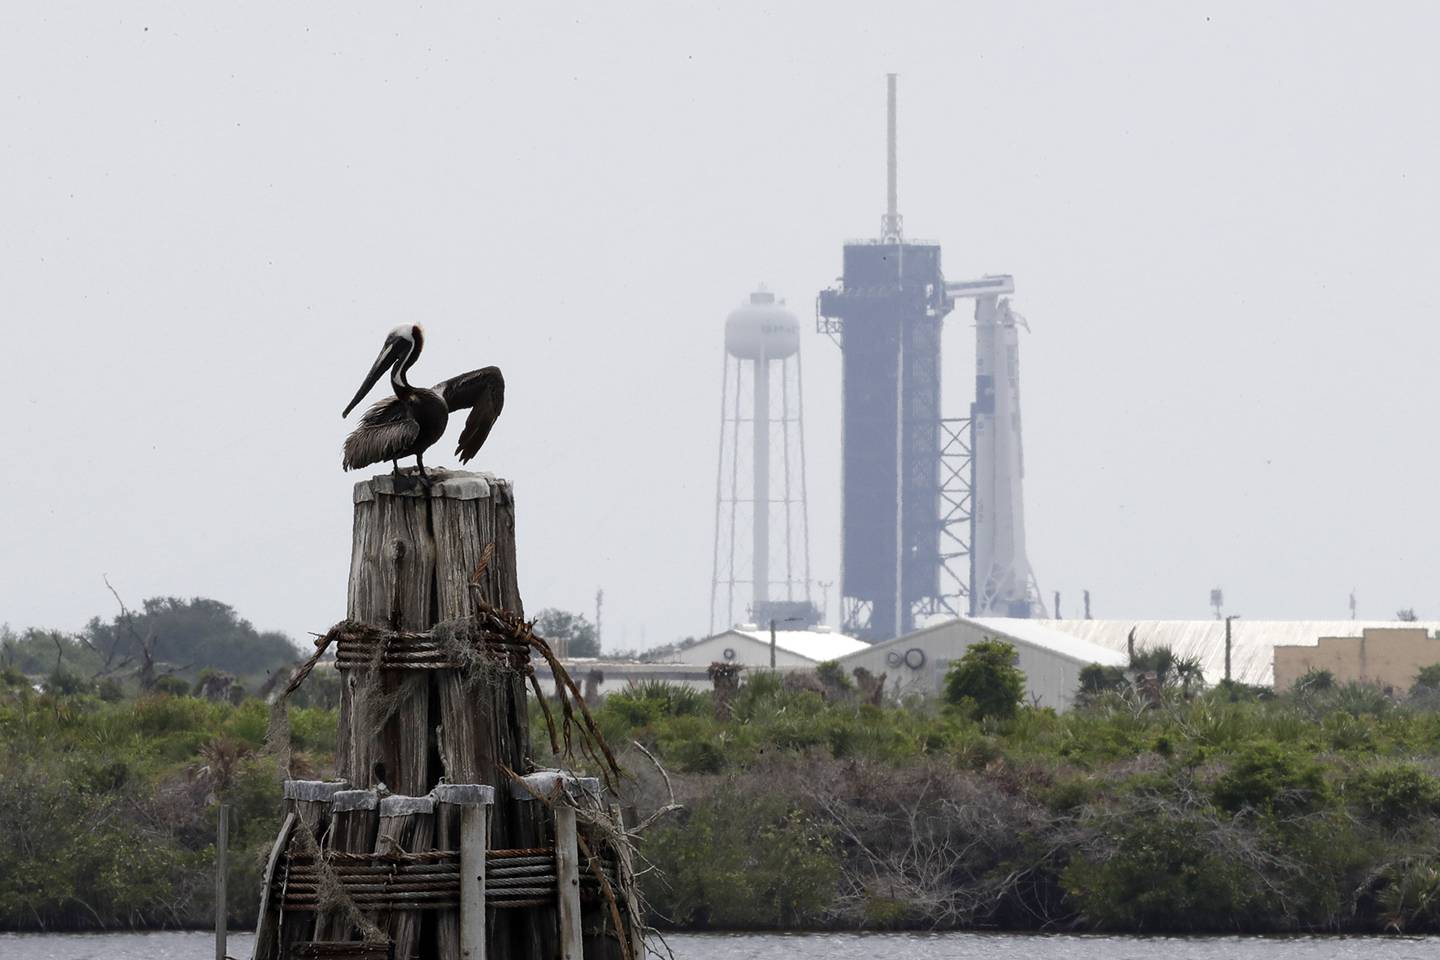 A pelican pauses on a barrier in front of the SpaceX Falcon 9, where NASA astronauts Doug Hurley and Bob Behnken in the Dragon crew capsule, will lift off from Pad 39-A at the Kennedy Space Center in Cape Canaveral, Fla., Wednesday, May 27, 2020.